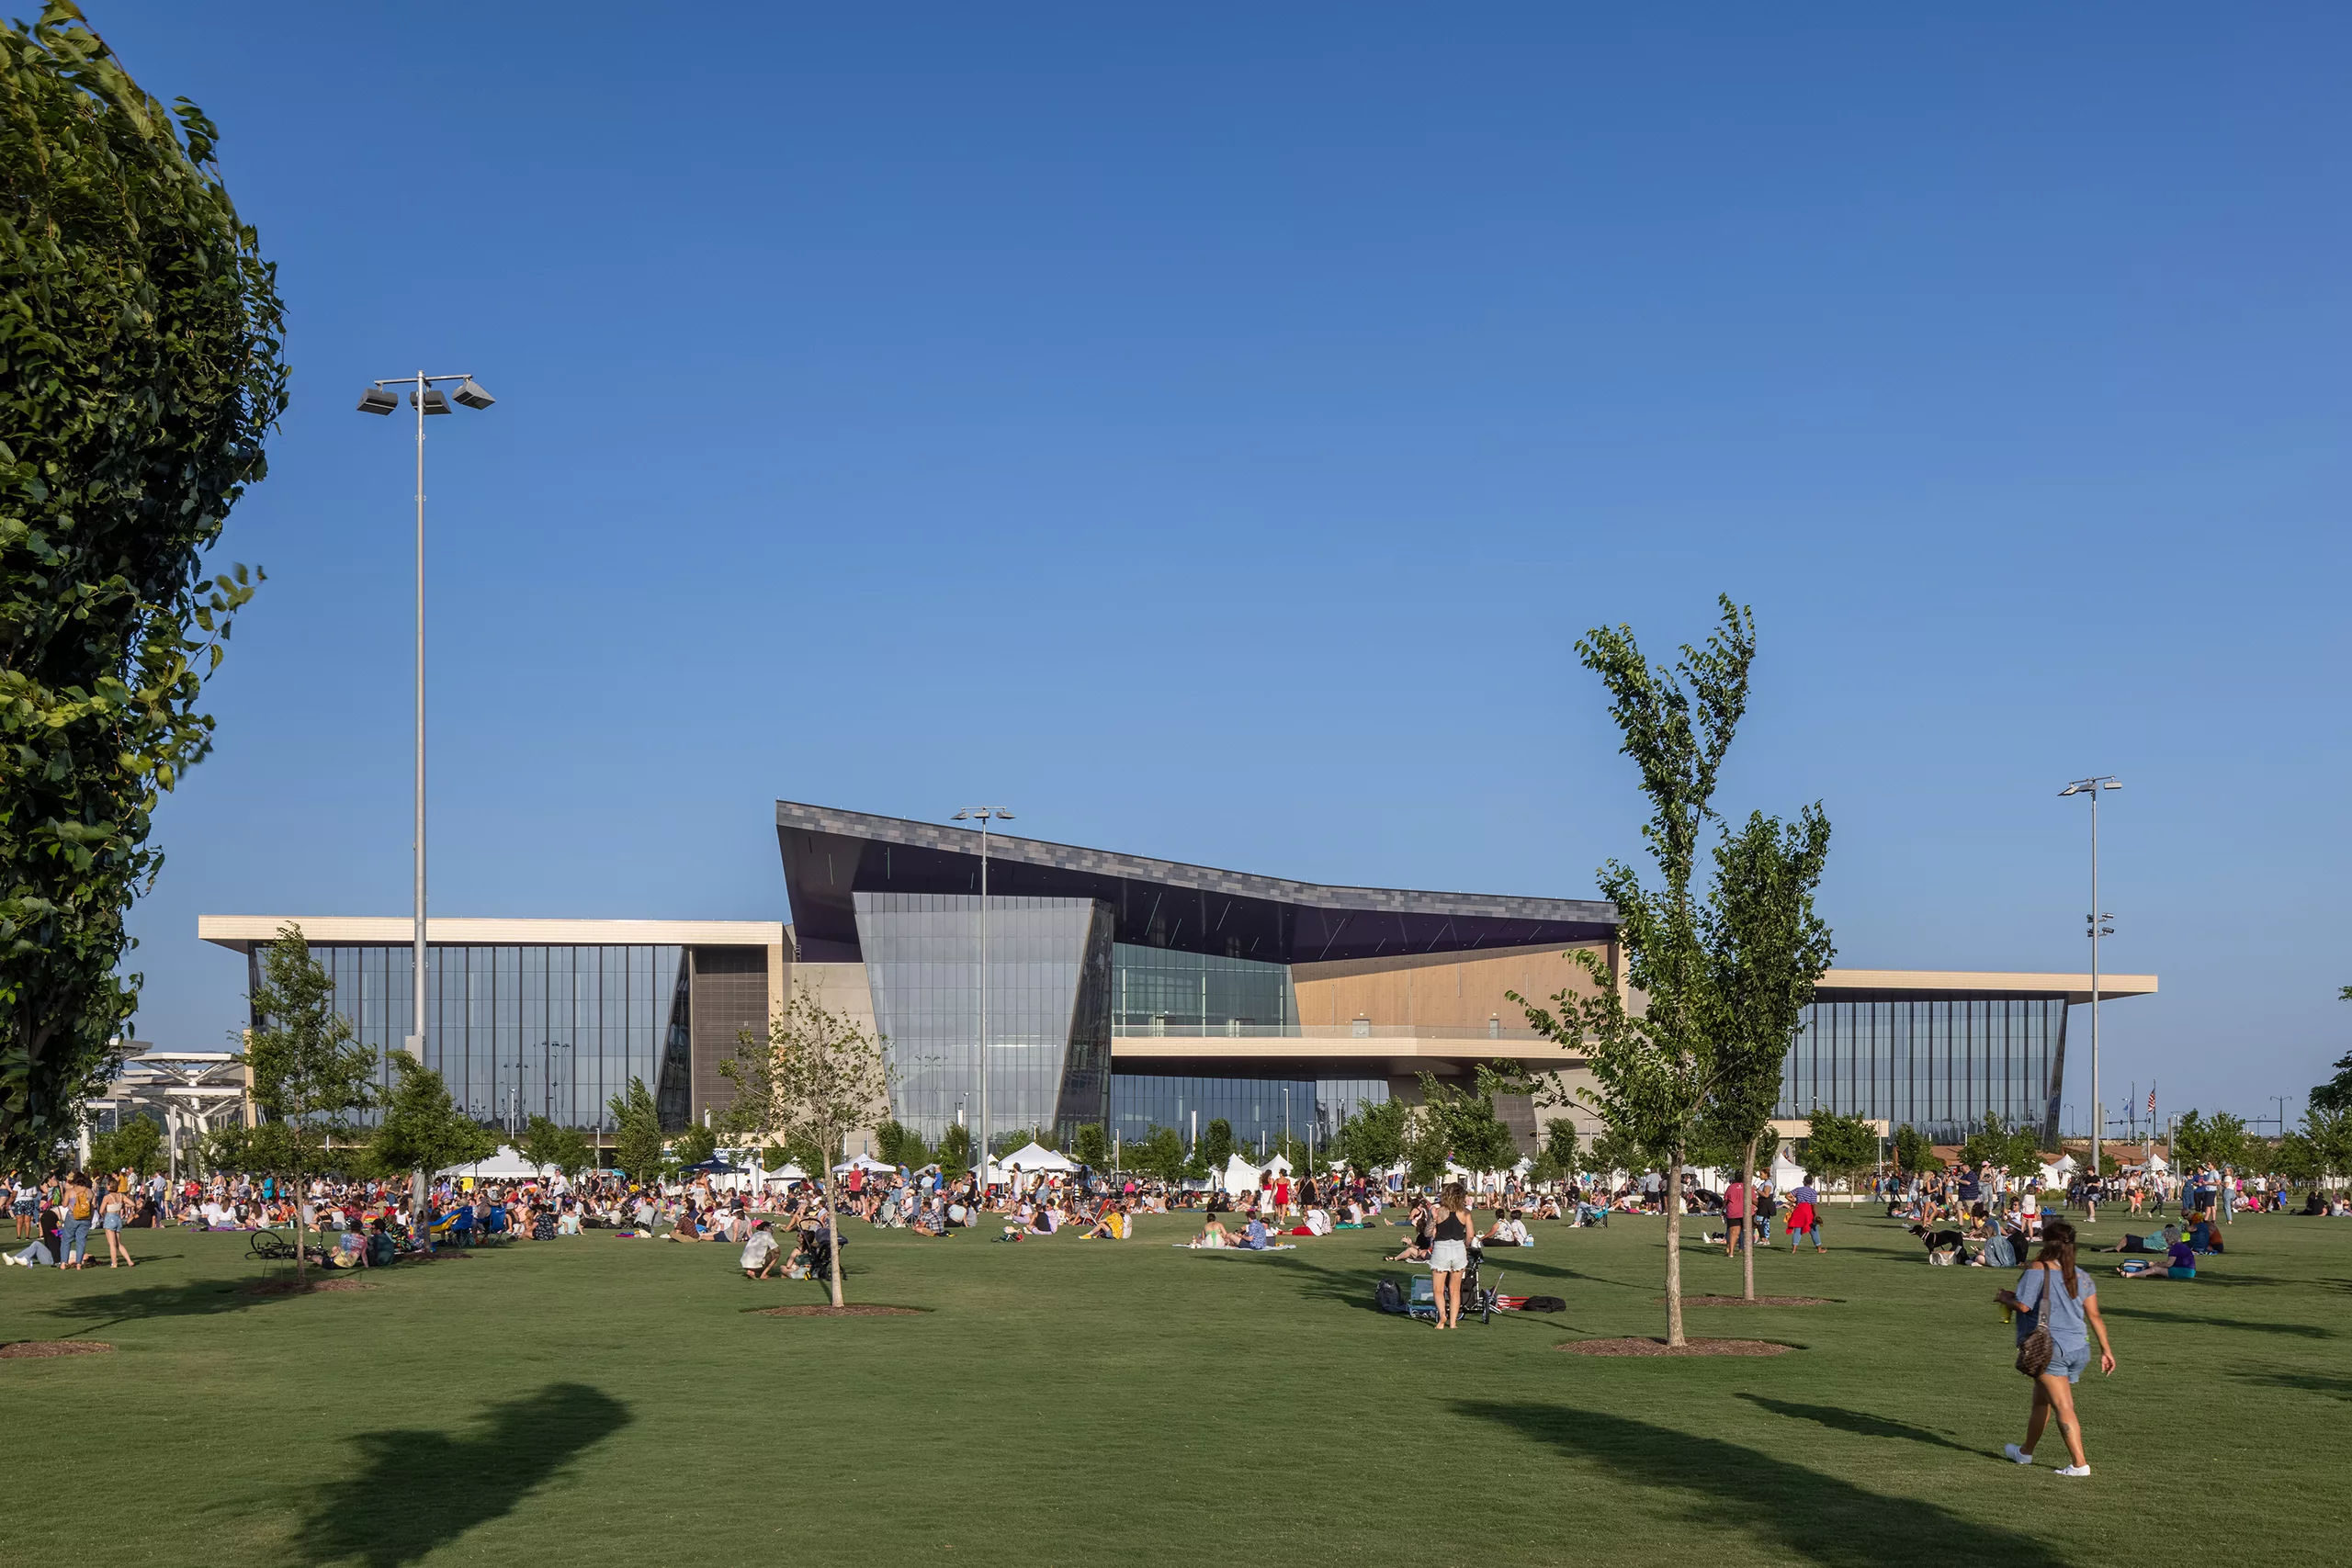 Exterior daylight view of the Oklahoma City Convention Center with an expansive front lawn dotted with trees, special-event tents, and people relaxing and recreating